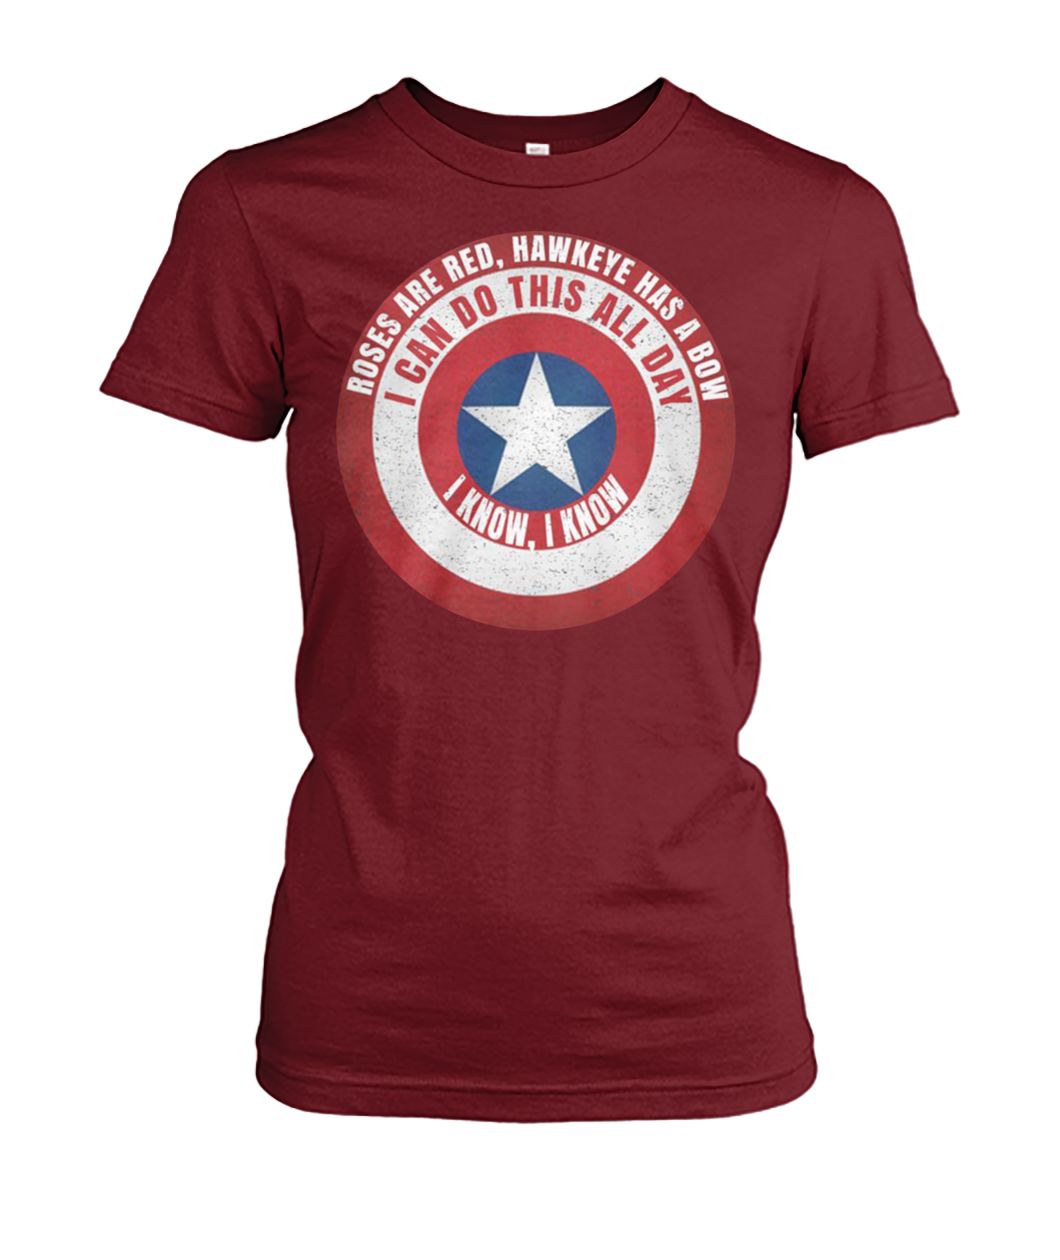 Captain america roses are red hawkeye has a bow I can do this all day I know women's crew tee